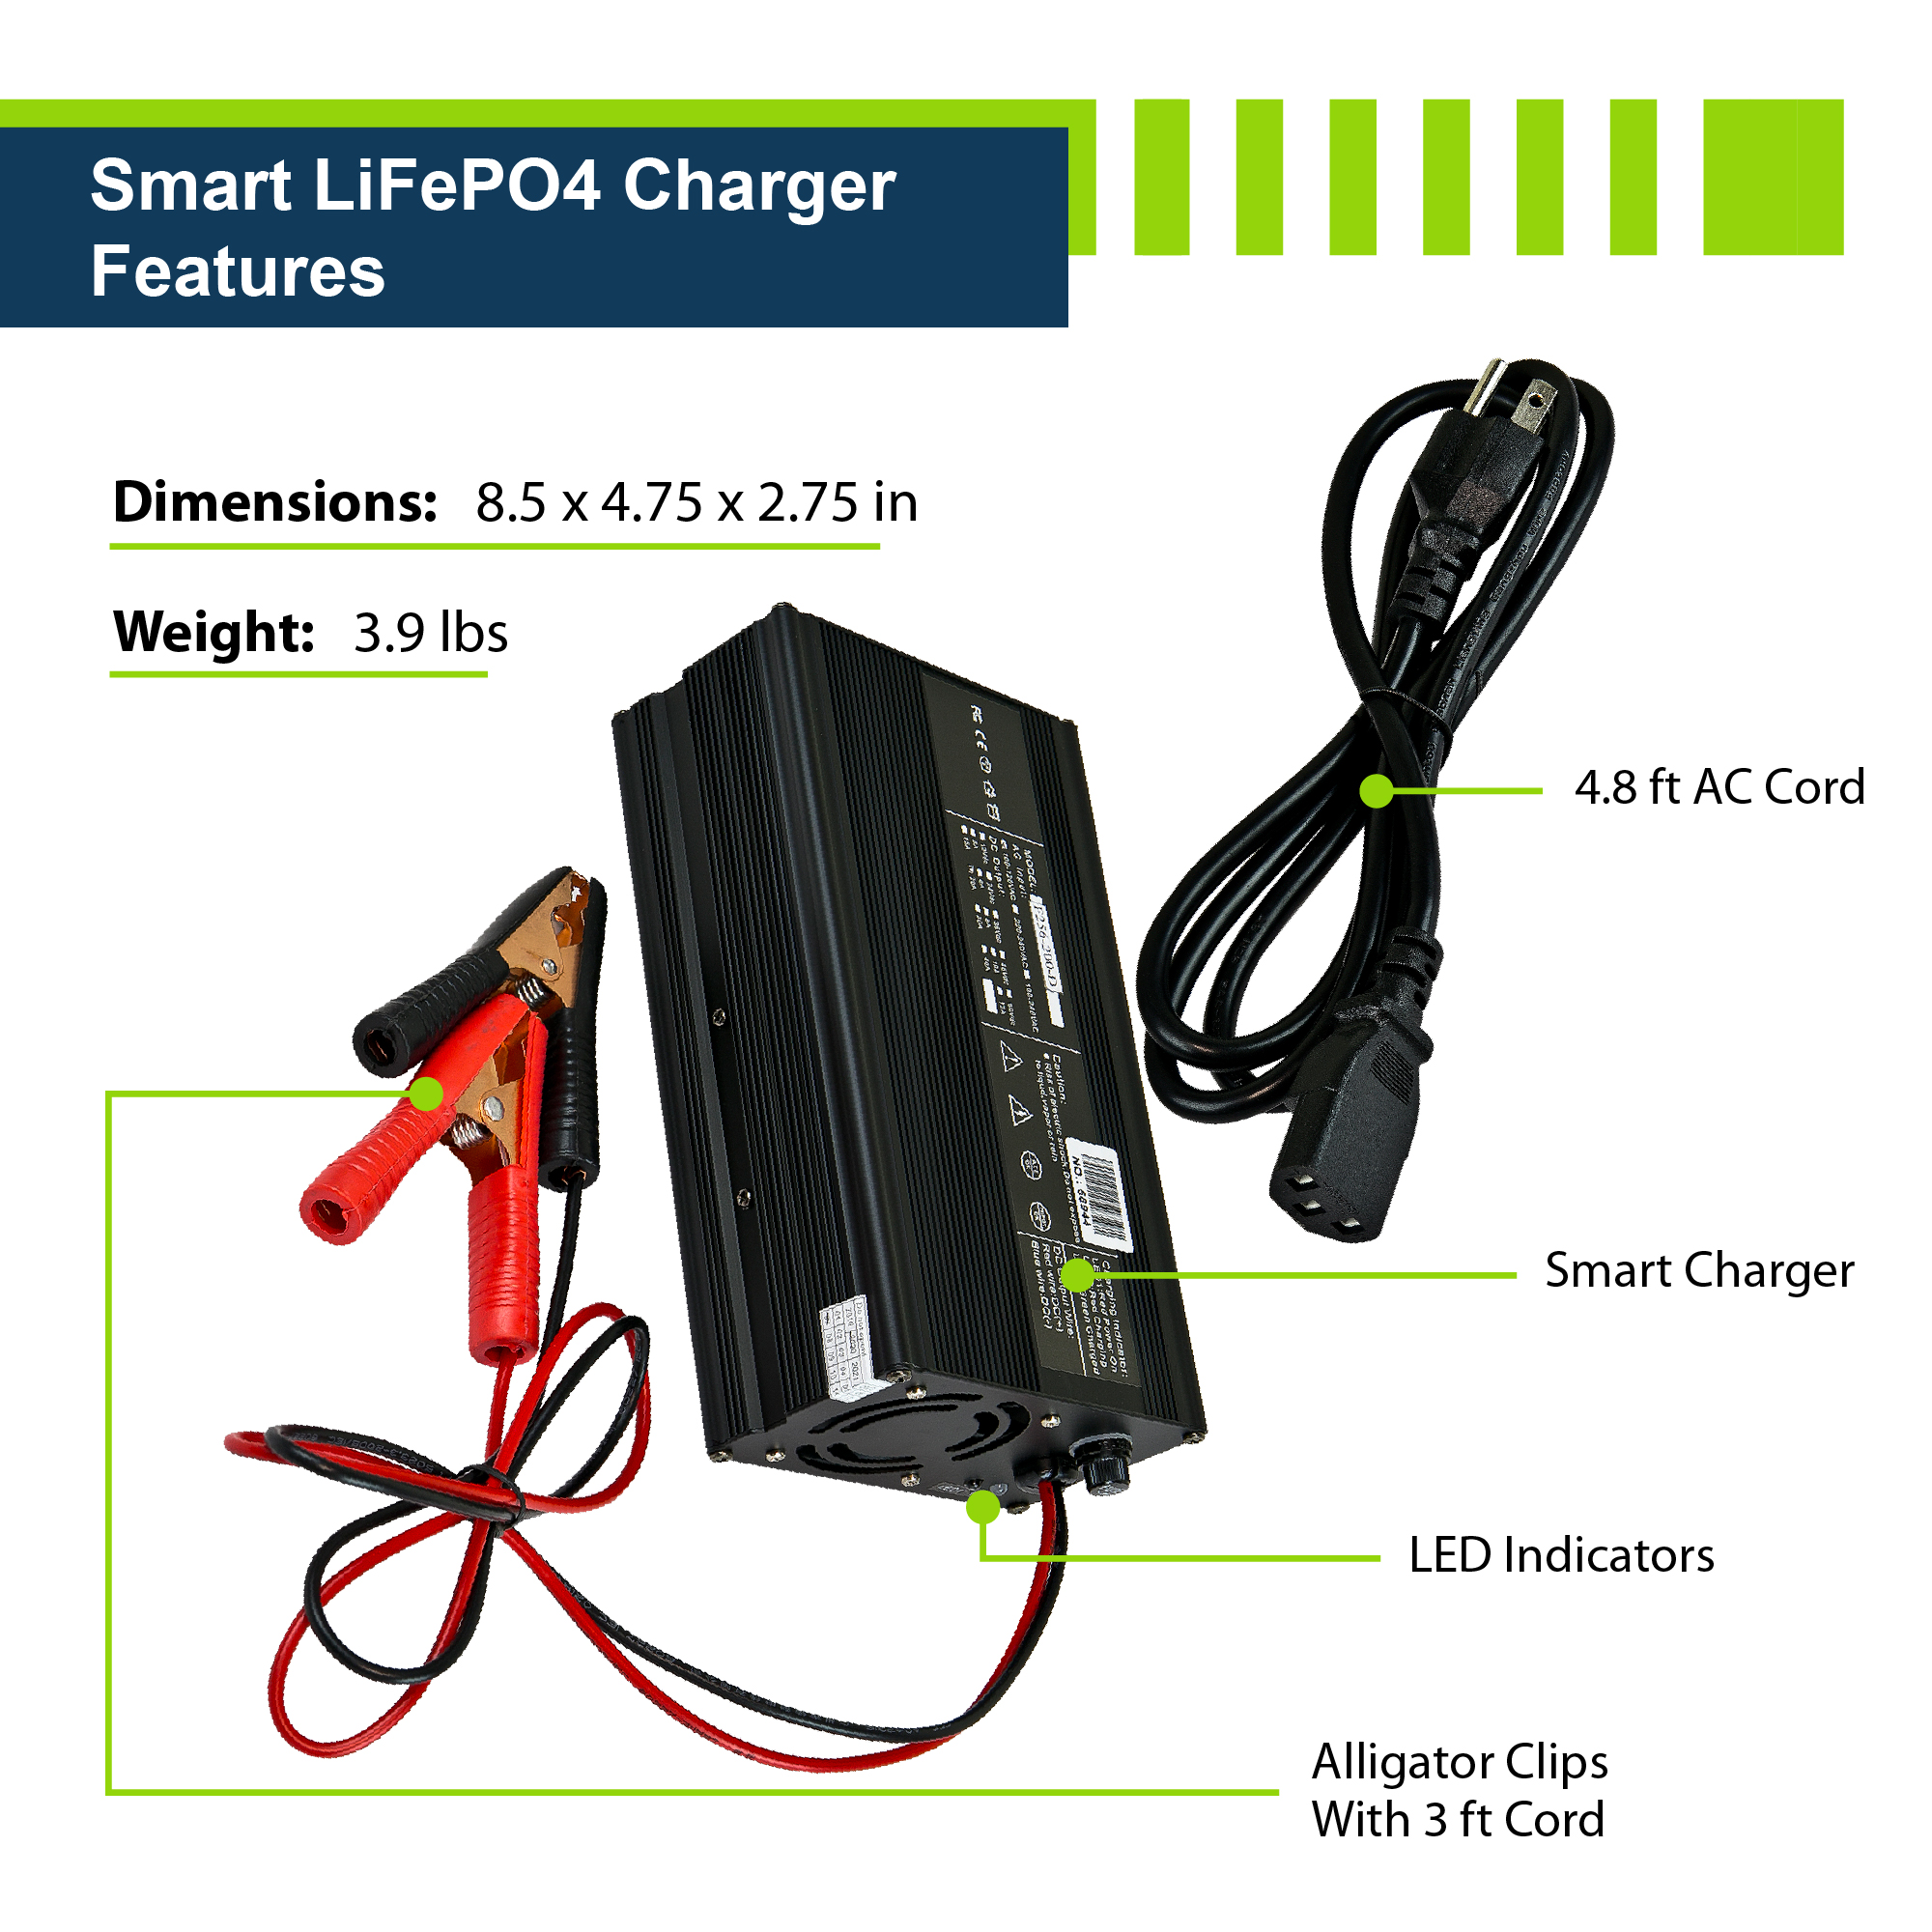 ExpertPower 24V 20A Smart Charger for Lithium LiFePO4 Deep Cycle  Rechargeable Batteries